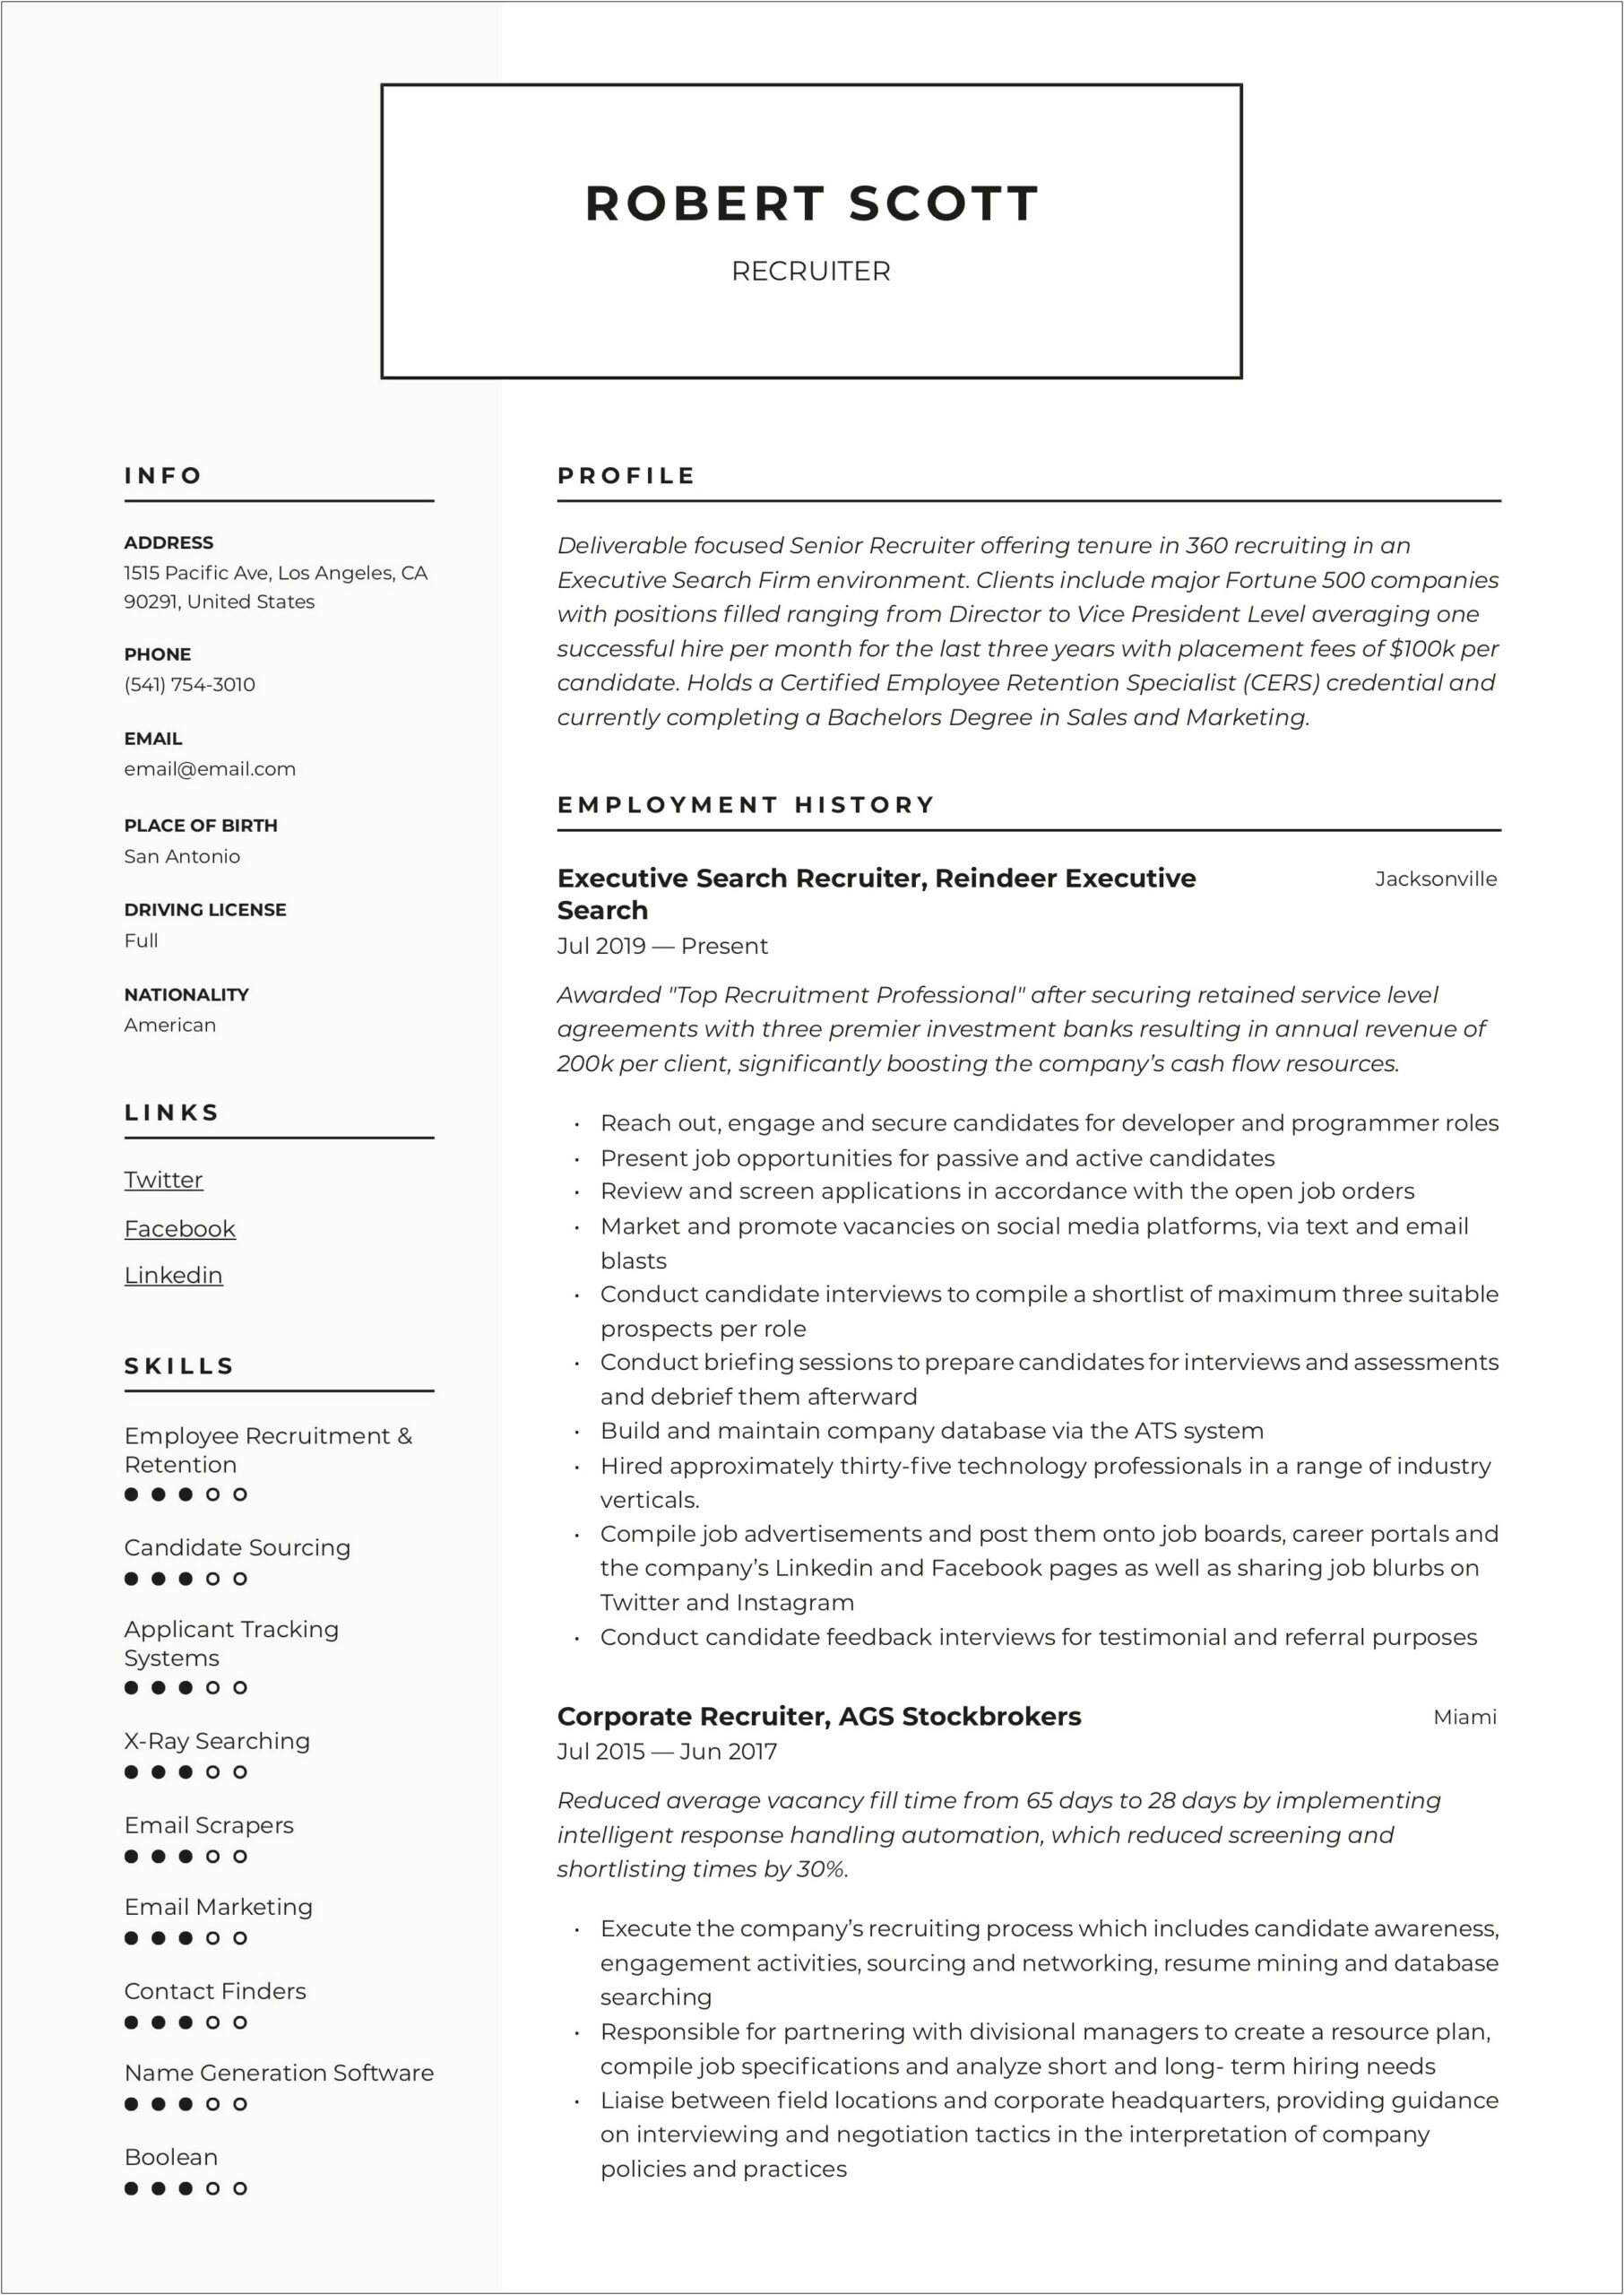 Sample Resume For A Recruiter Position